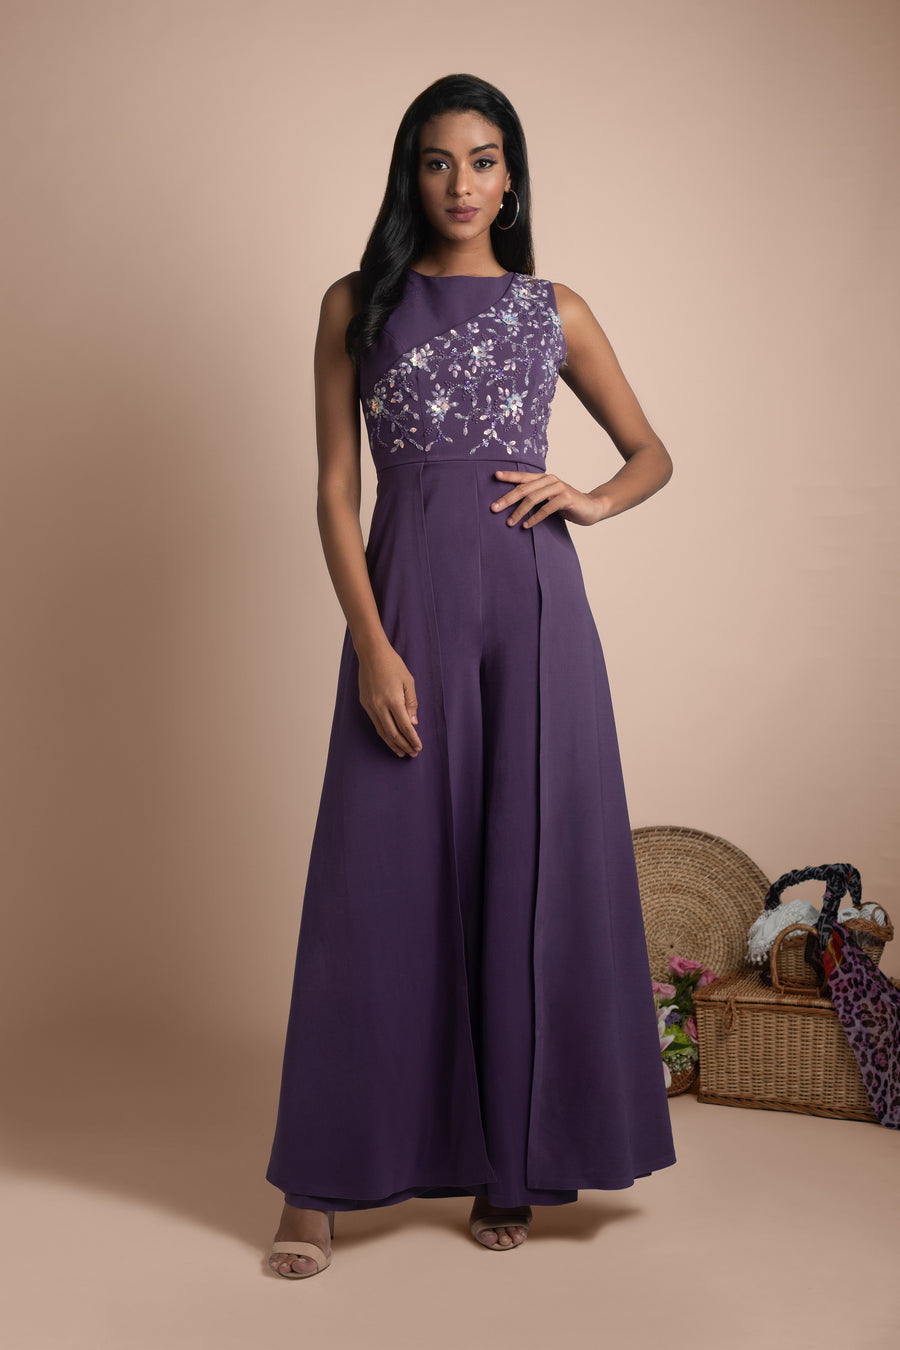 Jumpsuit Gown | Stylish formal and party wear.